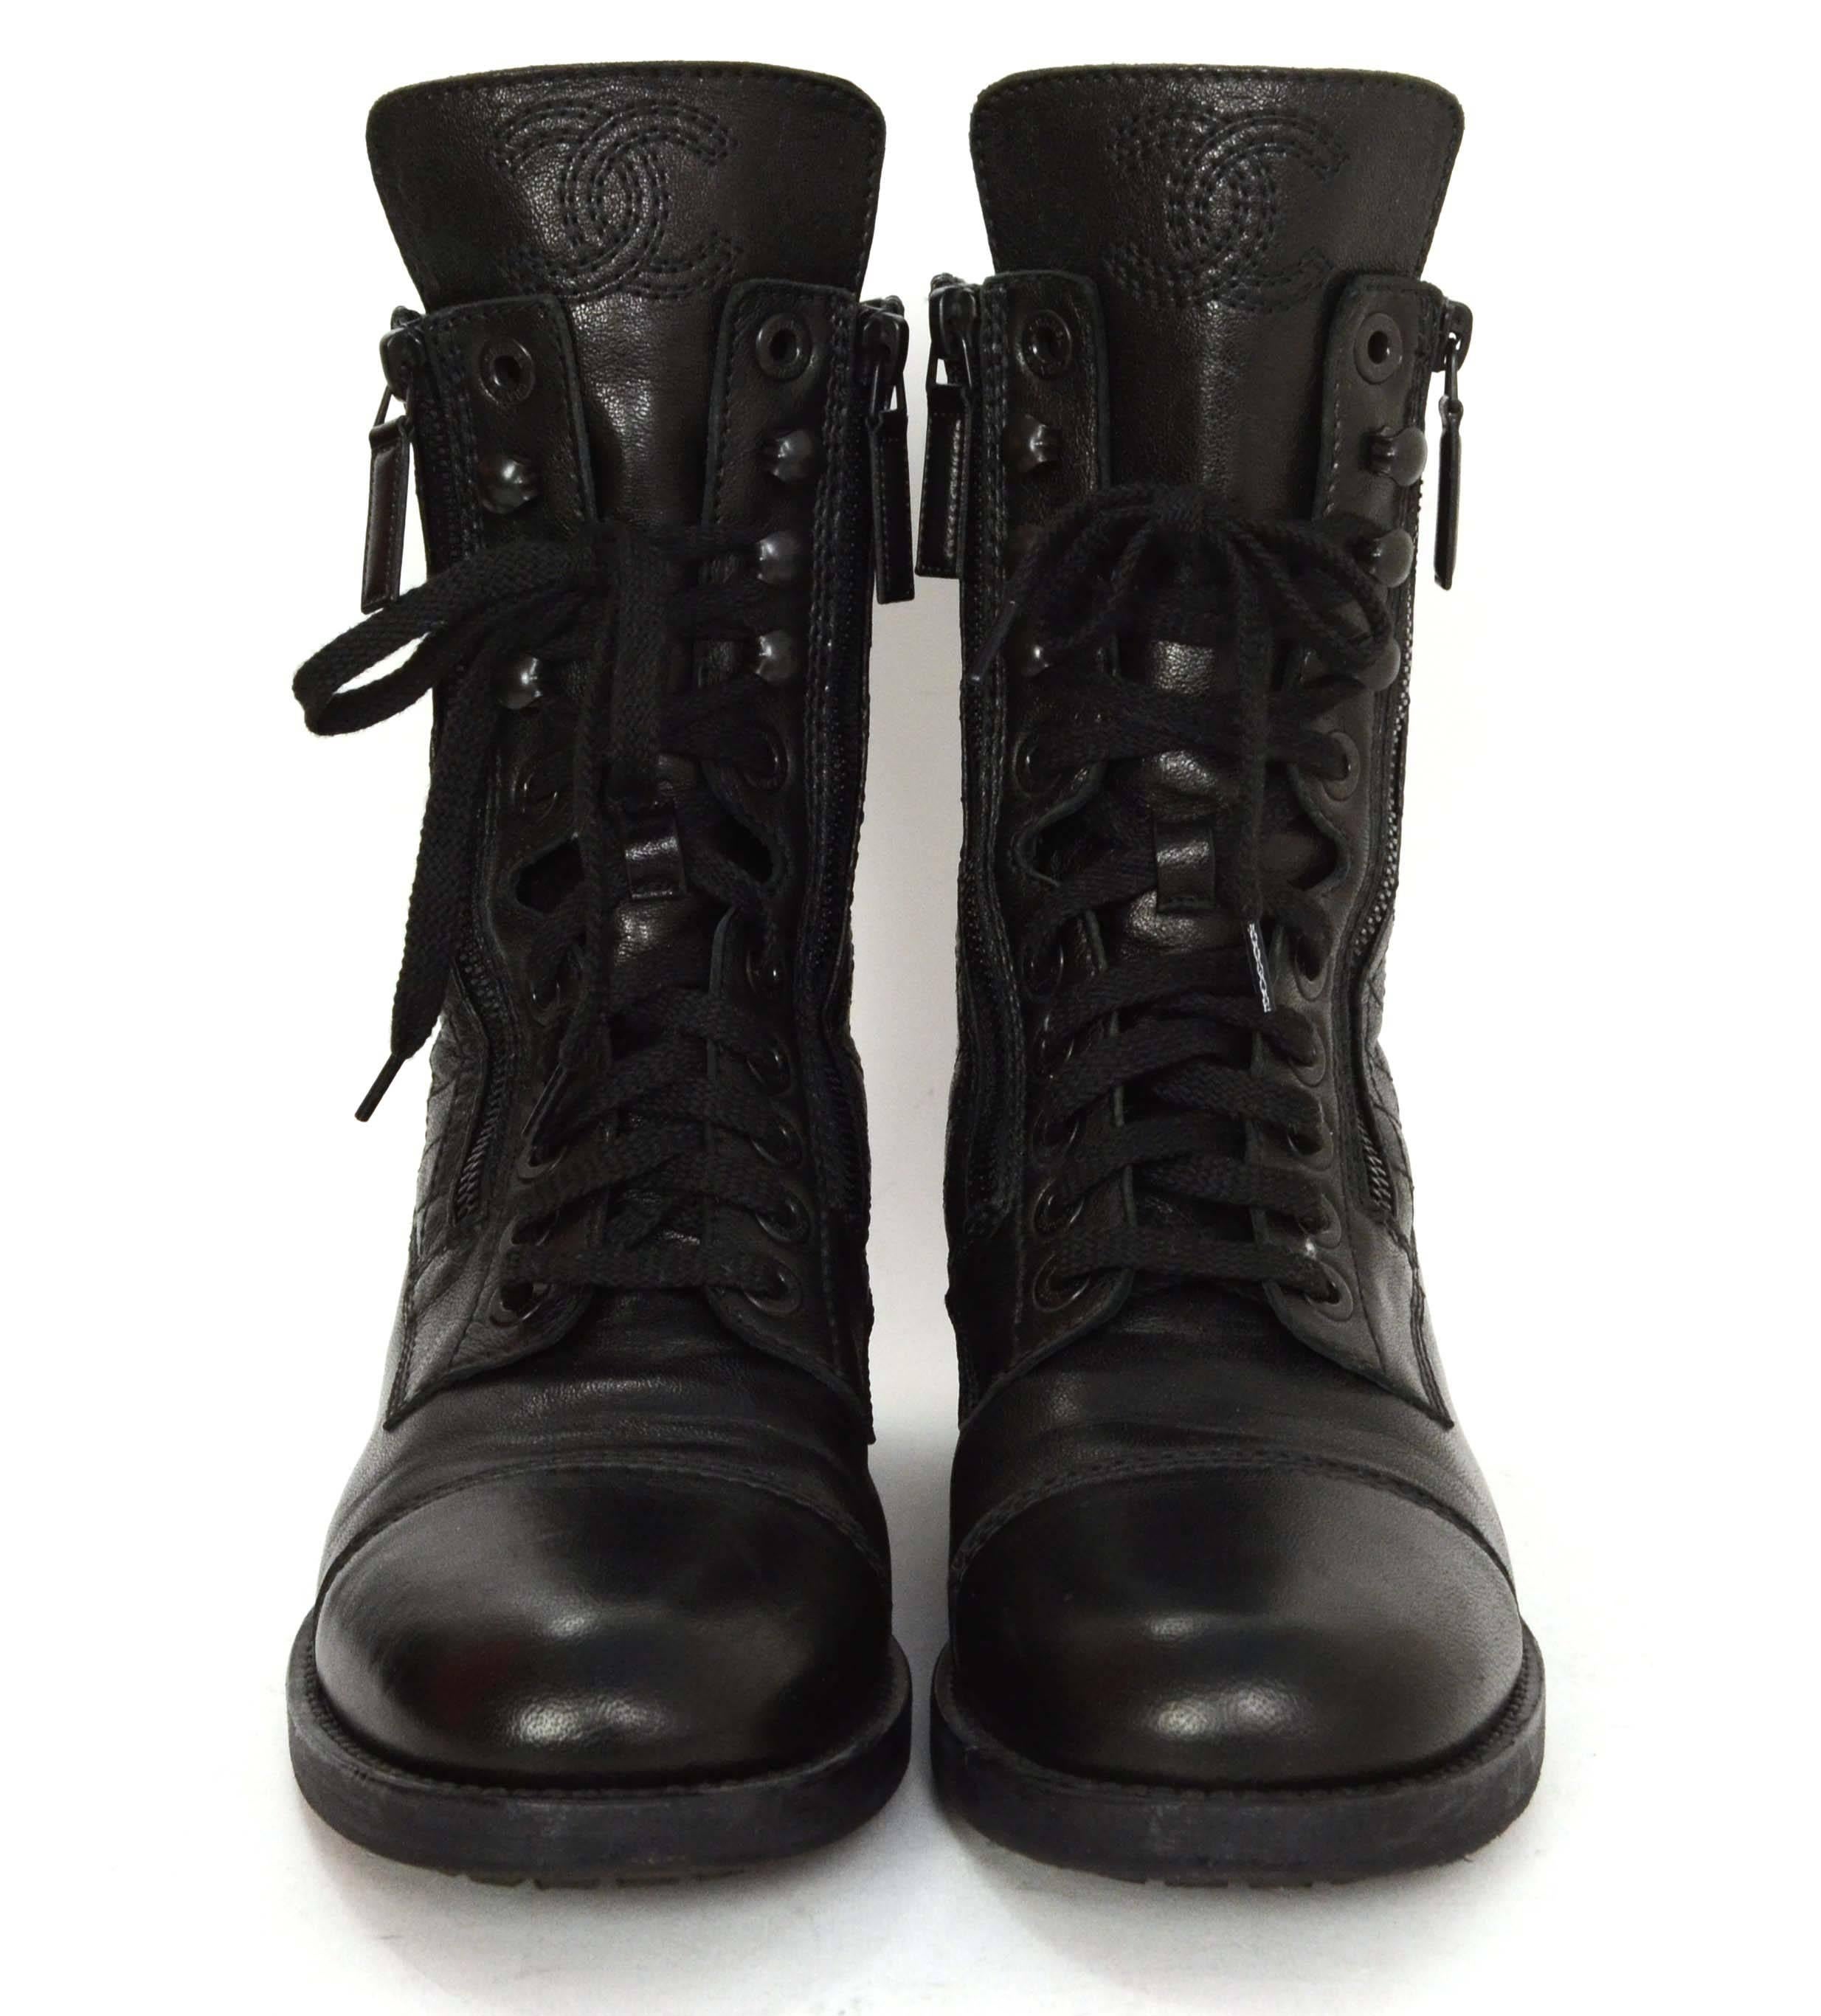 Chanel Black Leather Lace Up Combat Boots sz 39
Feature two zippers and quilting to the back of the boot

Made In: Italy

Color: Black

Materials: Leather

Lining: Leather lined

Closure/Opening: Two zippers and laces

Overall